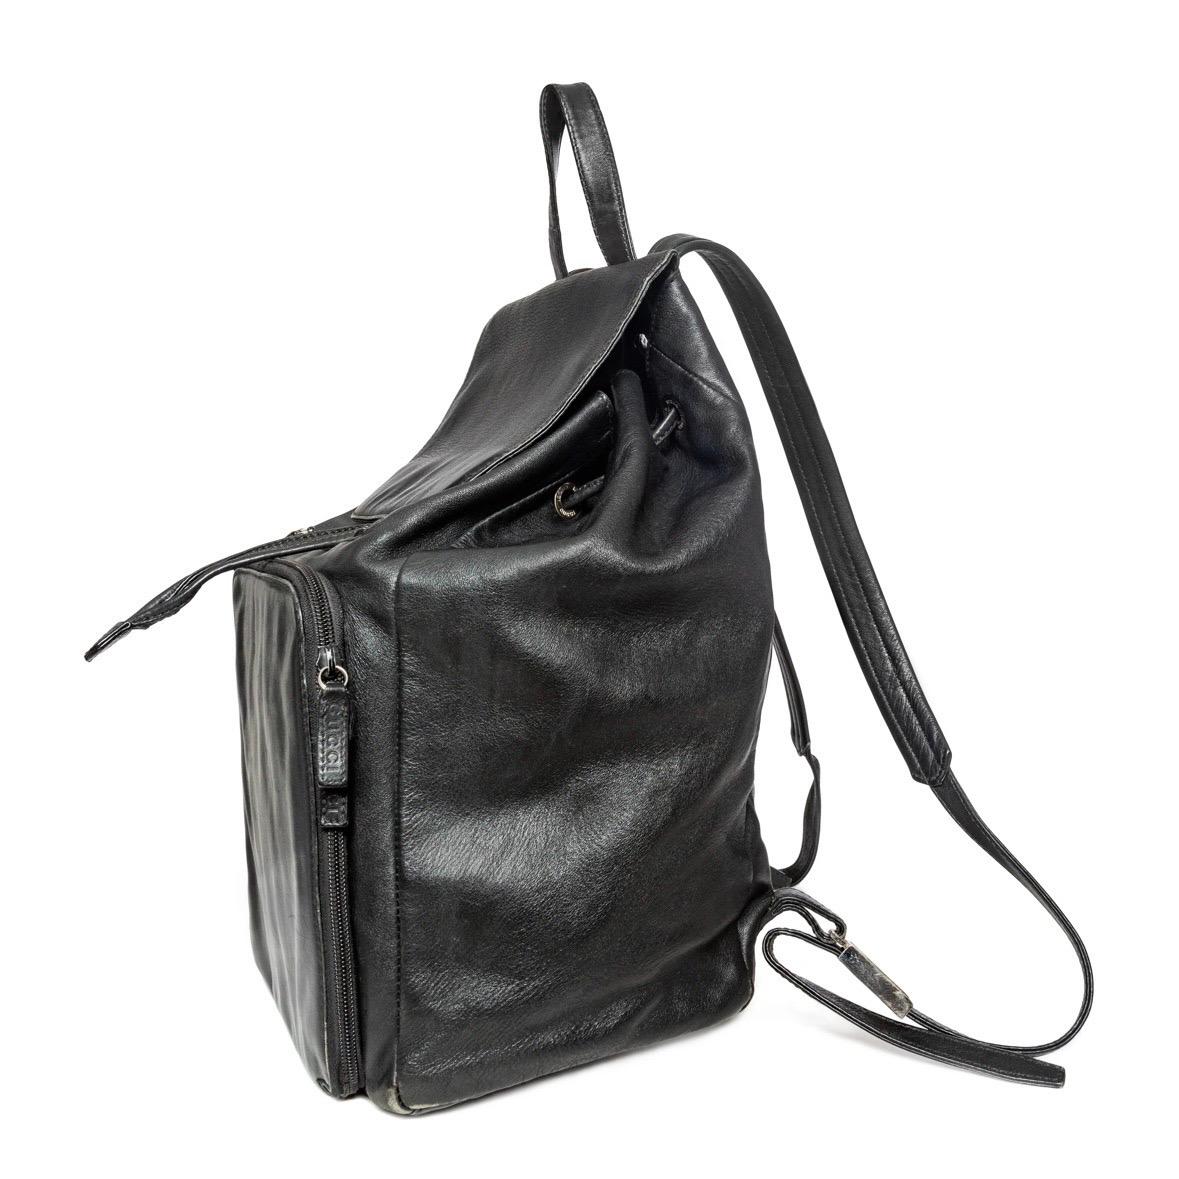 Gucci Vintage Black Leather Drawstring Backpack

Vintage; circa late 90s–early 2000s
Tom Ford for Gucci
Solid Black
Silver-tone hardware
Flap top with drawstring closure
Zippered outer compartment and pocket
Top hook 
Adjustable back straps; lift